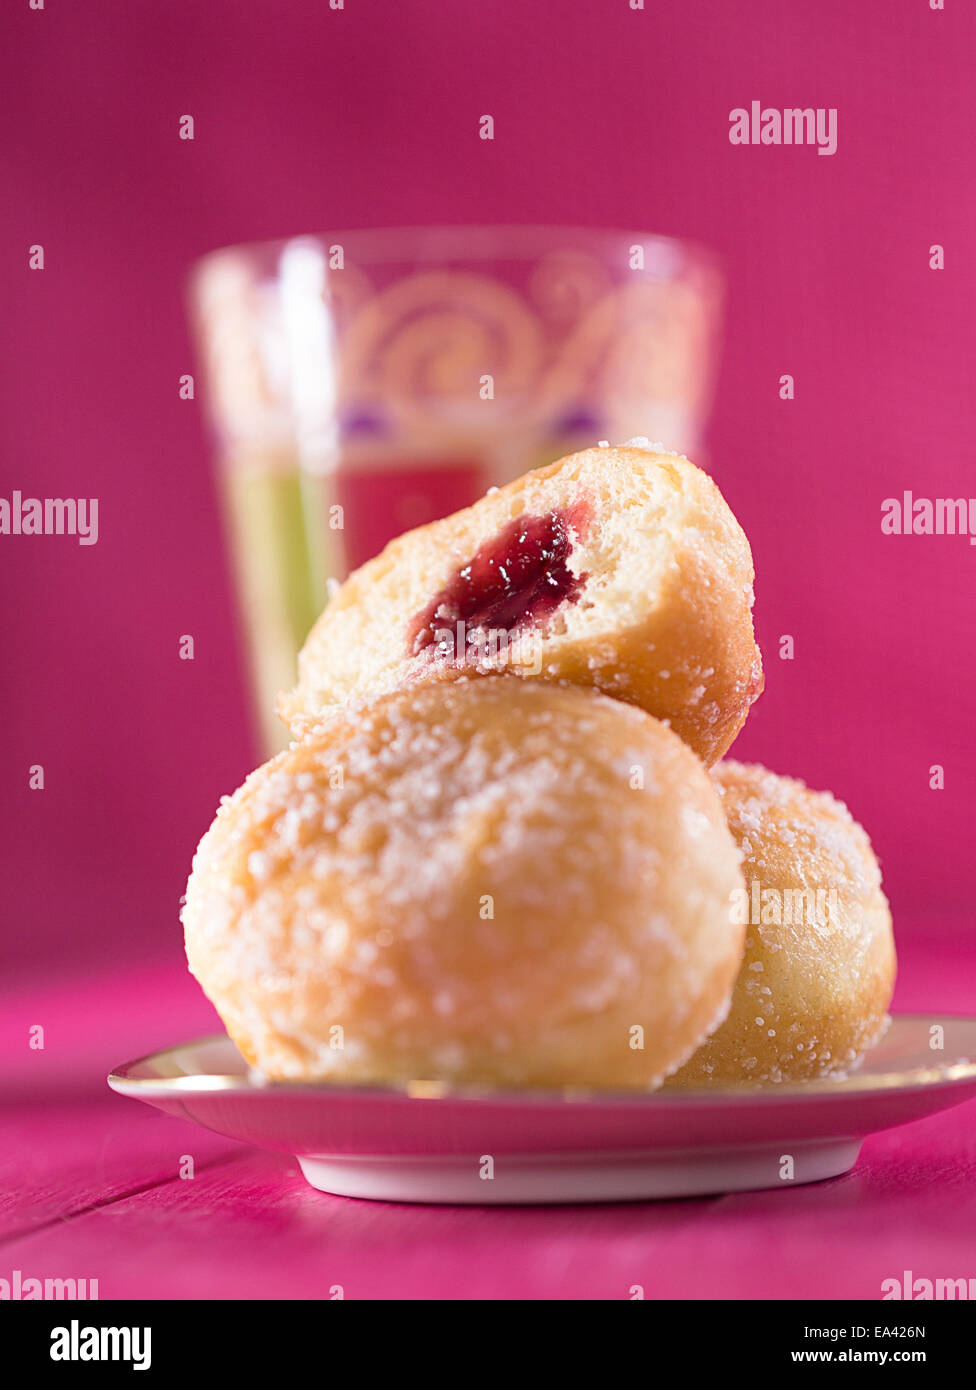 Donuts on a plate Stock Photo